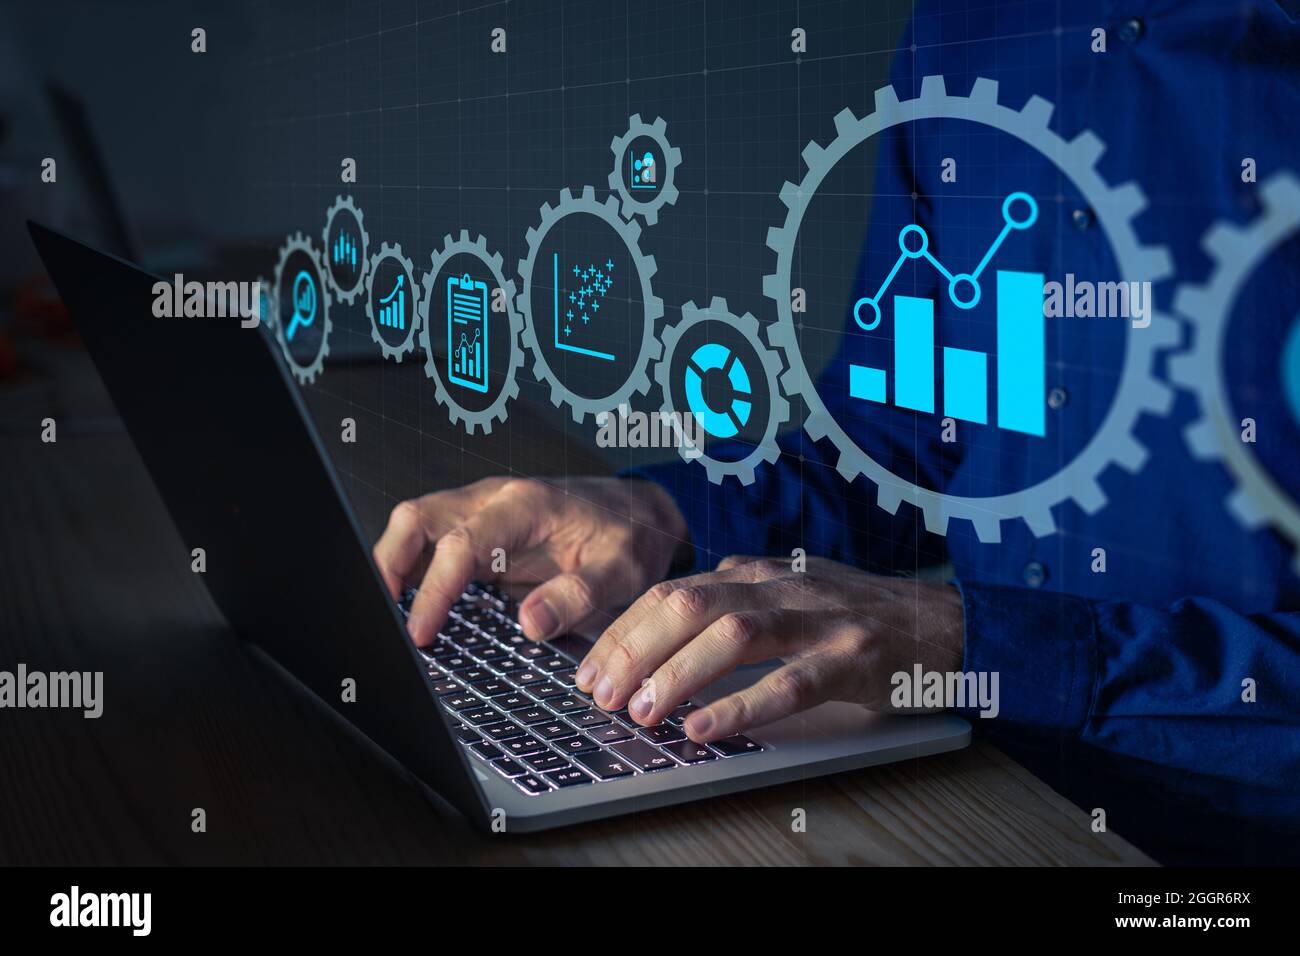 Data science analyst working with statistics and report on computer. Concept with icons of charts and graph connected. Business analytics consultant a Stock Photo